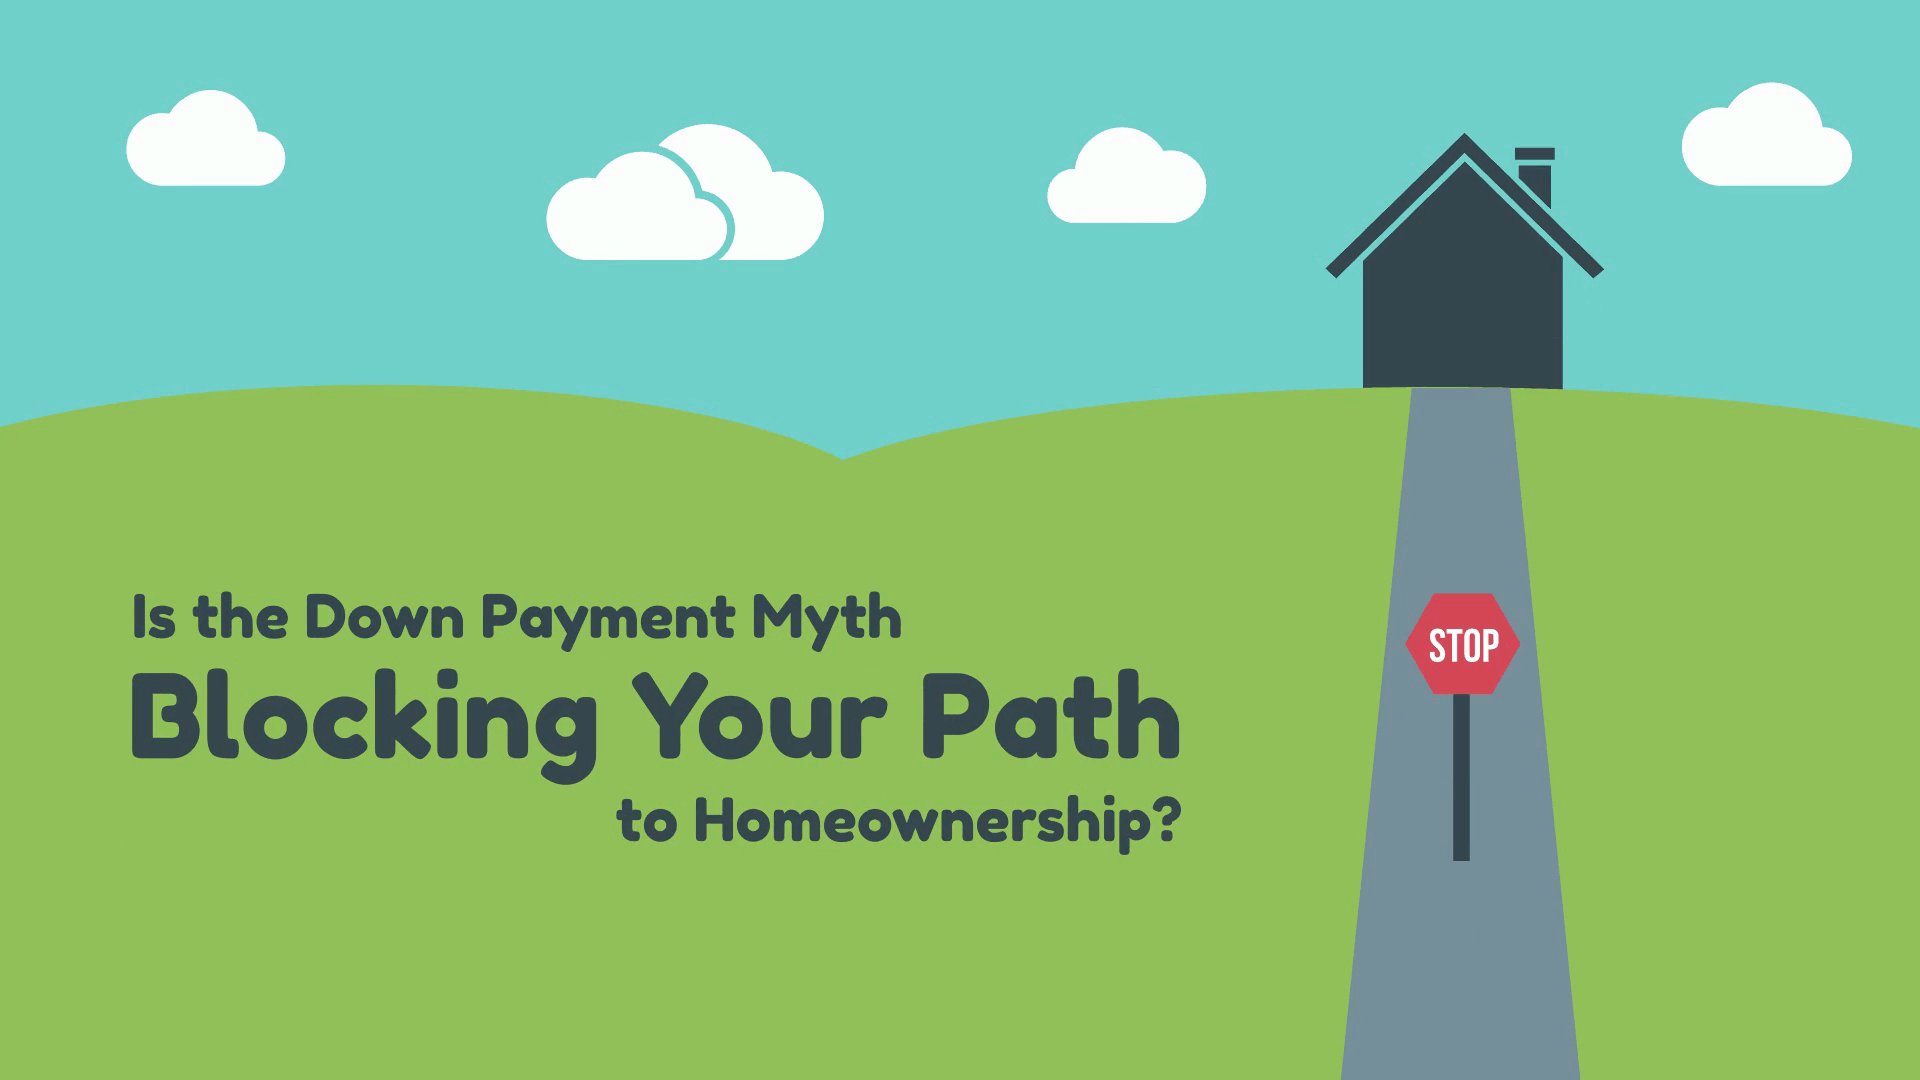 Is the Down Payment Myth Blocking Your Path to Homeownership?